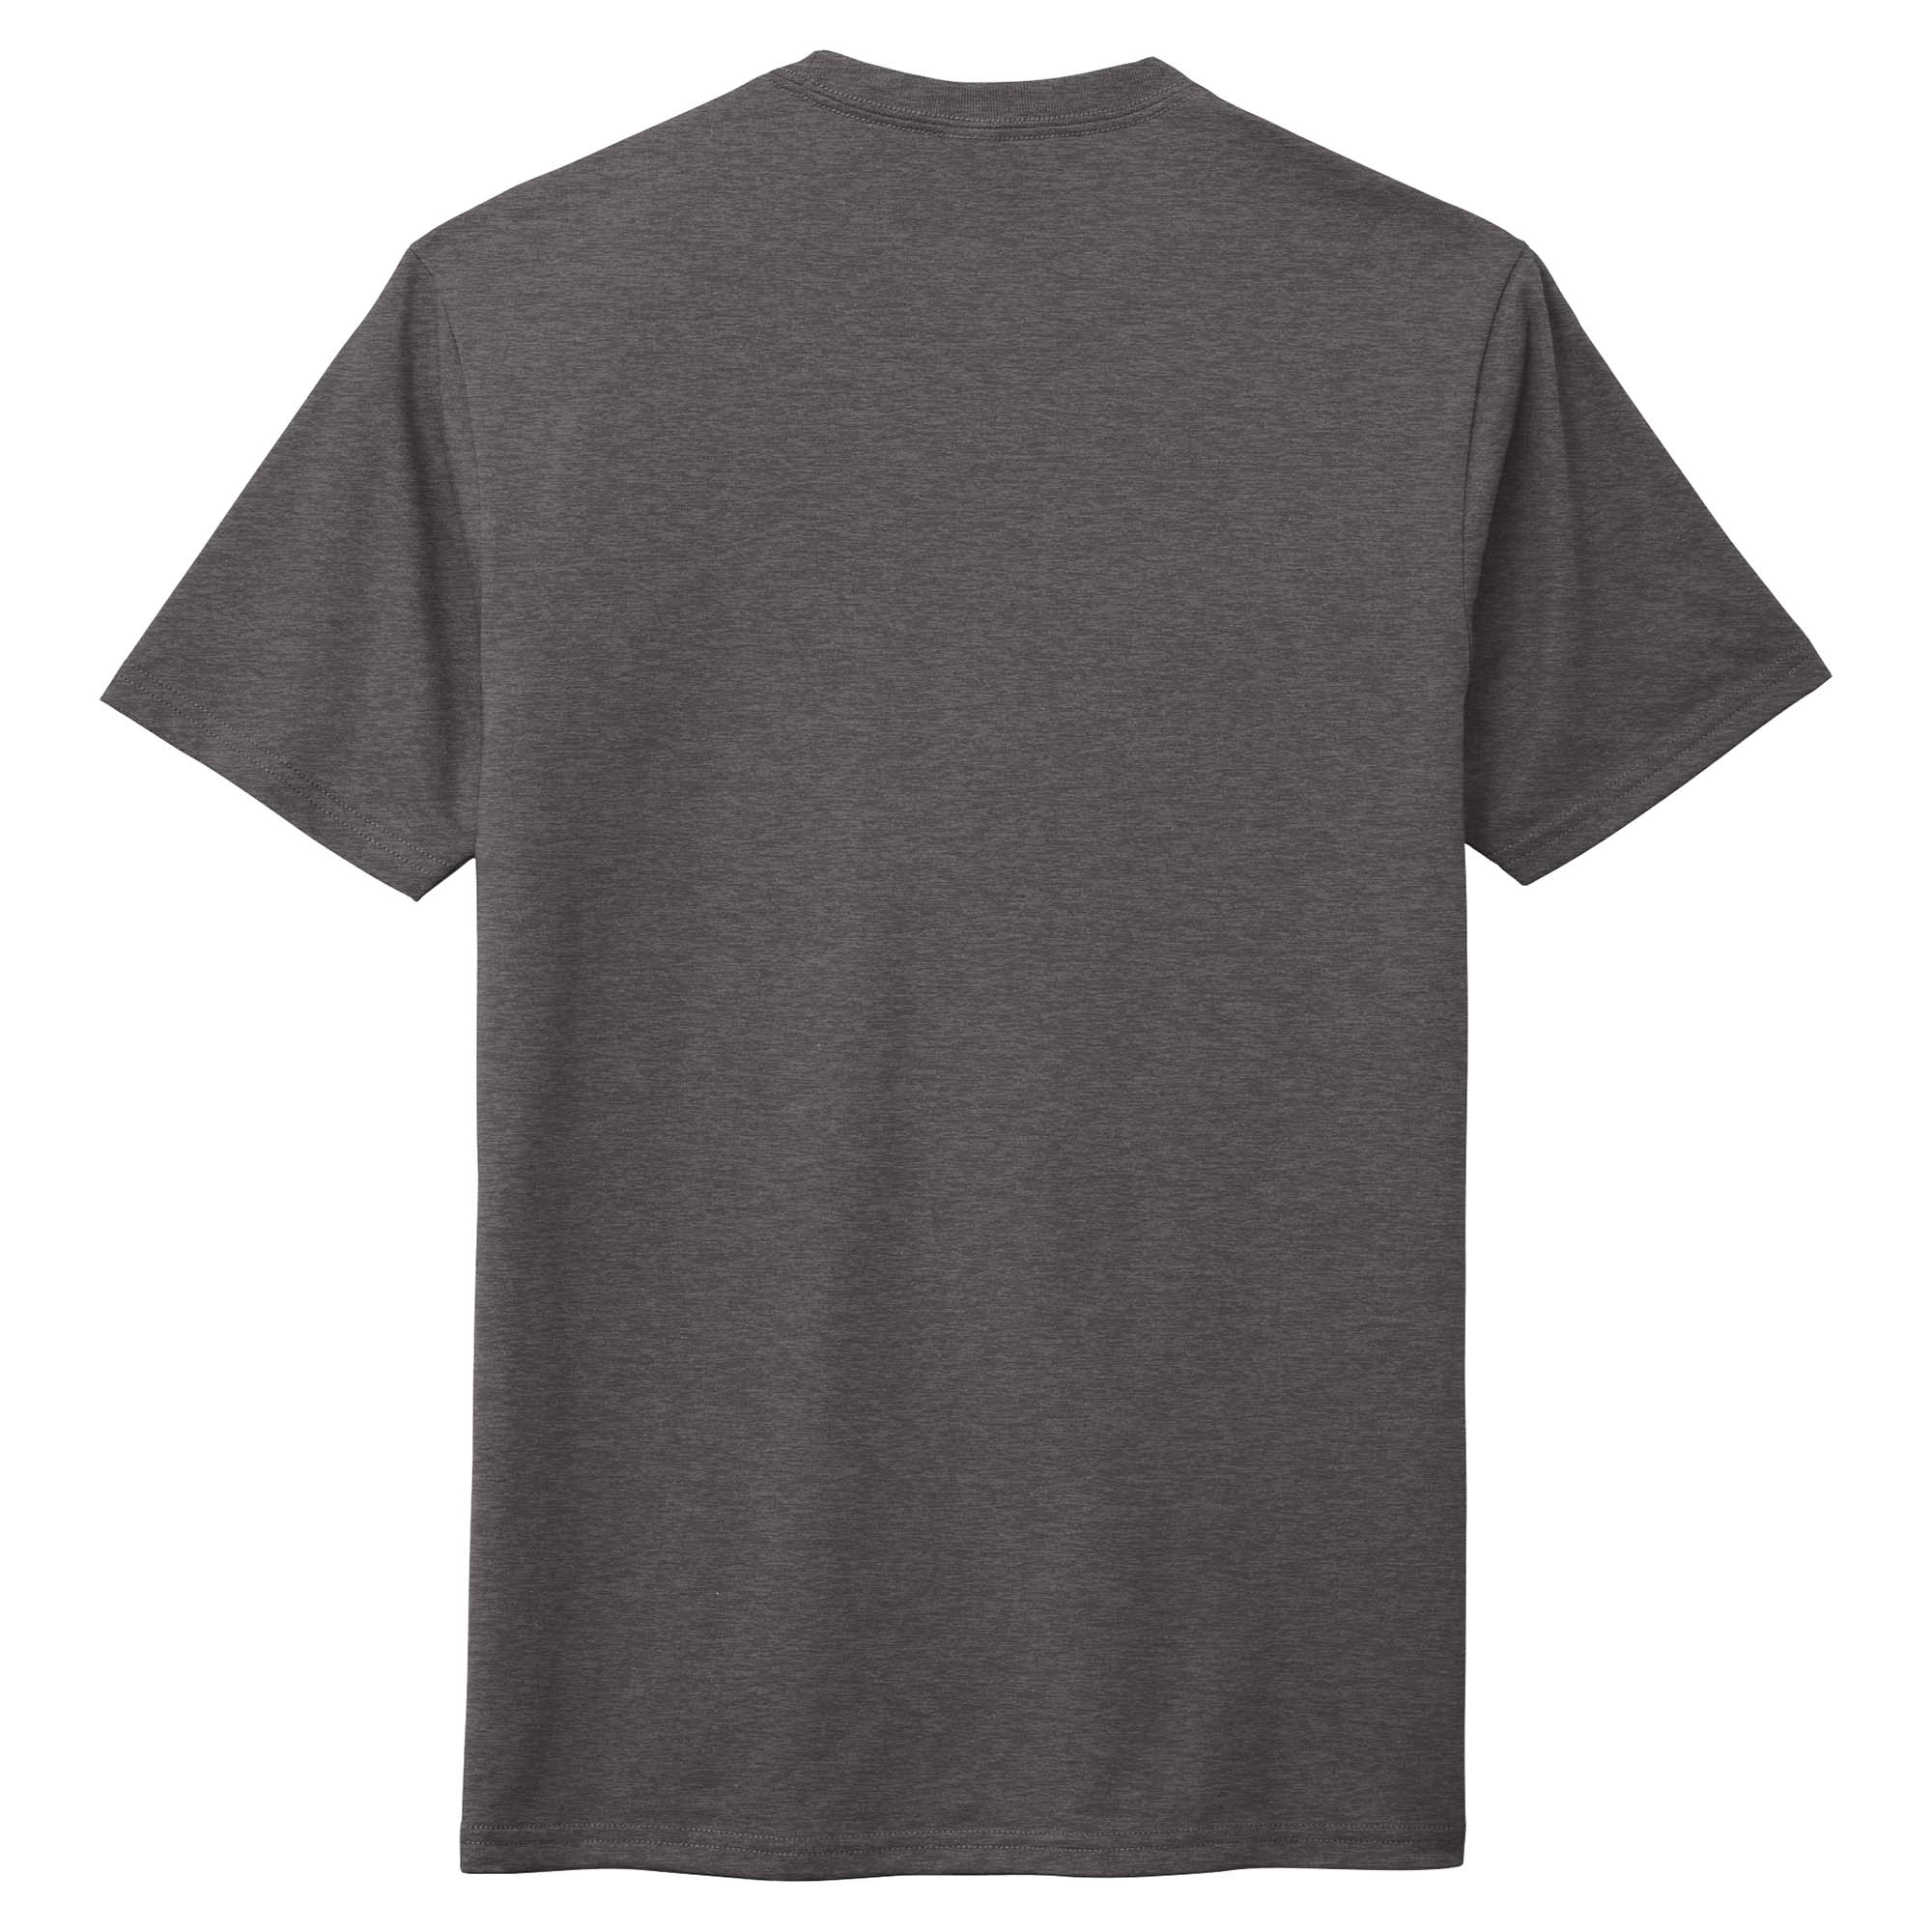 District DM130 Perfect Tri Crew Tee - Heathered Charcoal | Full Source